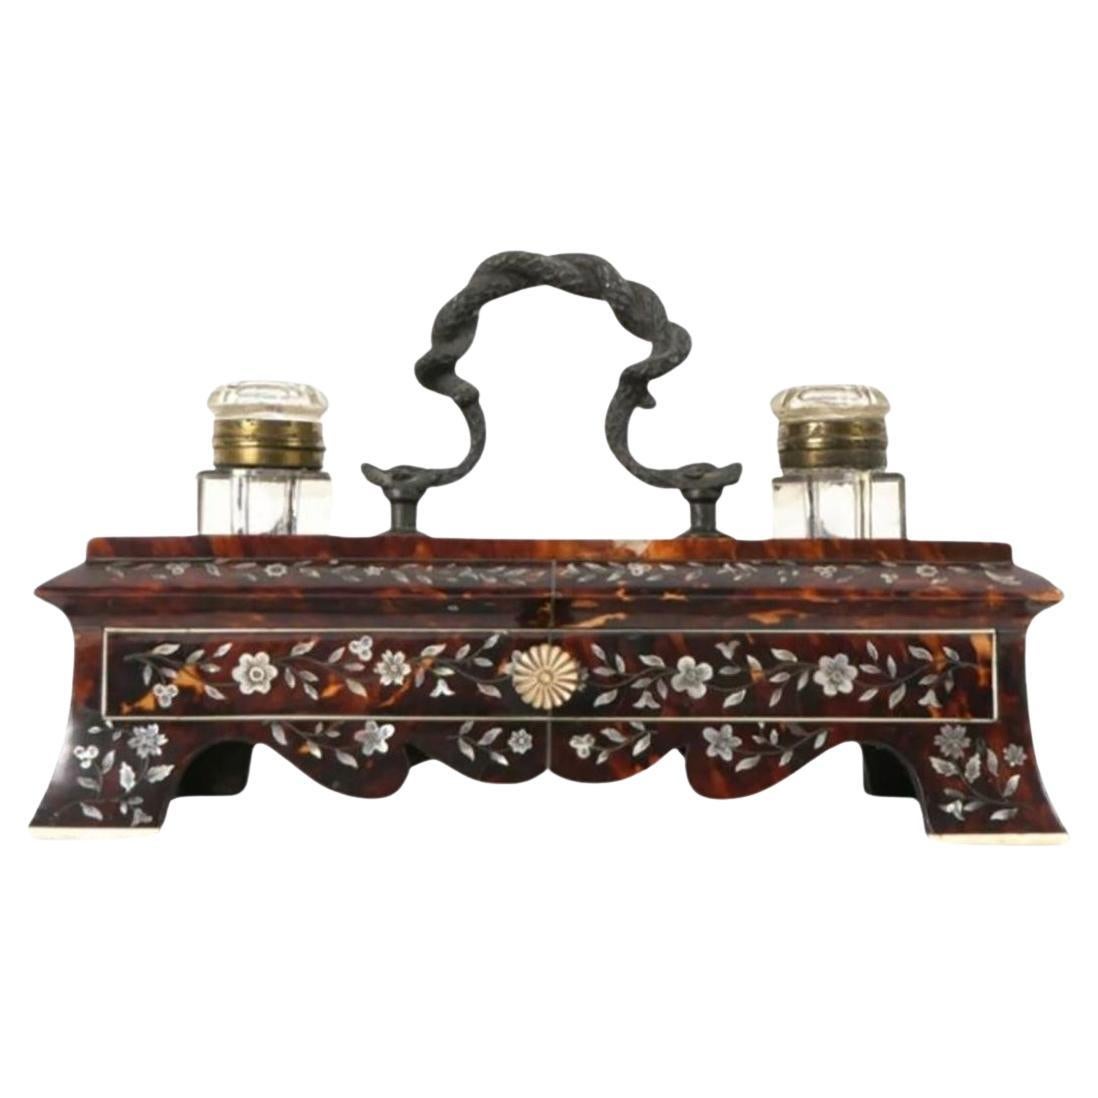 An exquisite blend of elegance and functionality, this tortoiseshell double inkwell is a true collector's delight. With its stunning glass inkwells, brass accents, and convenient storage drawer, it's a timeless piece that adds a touch of